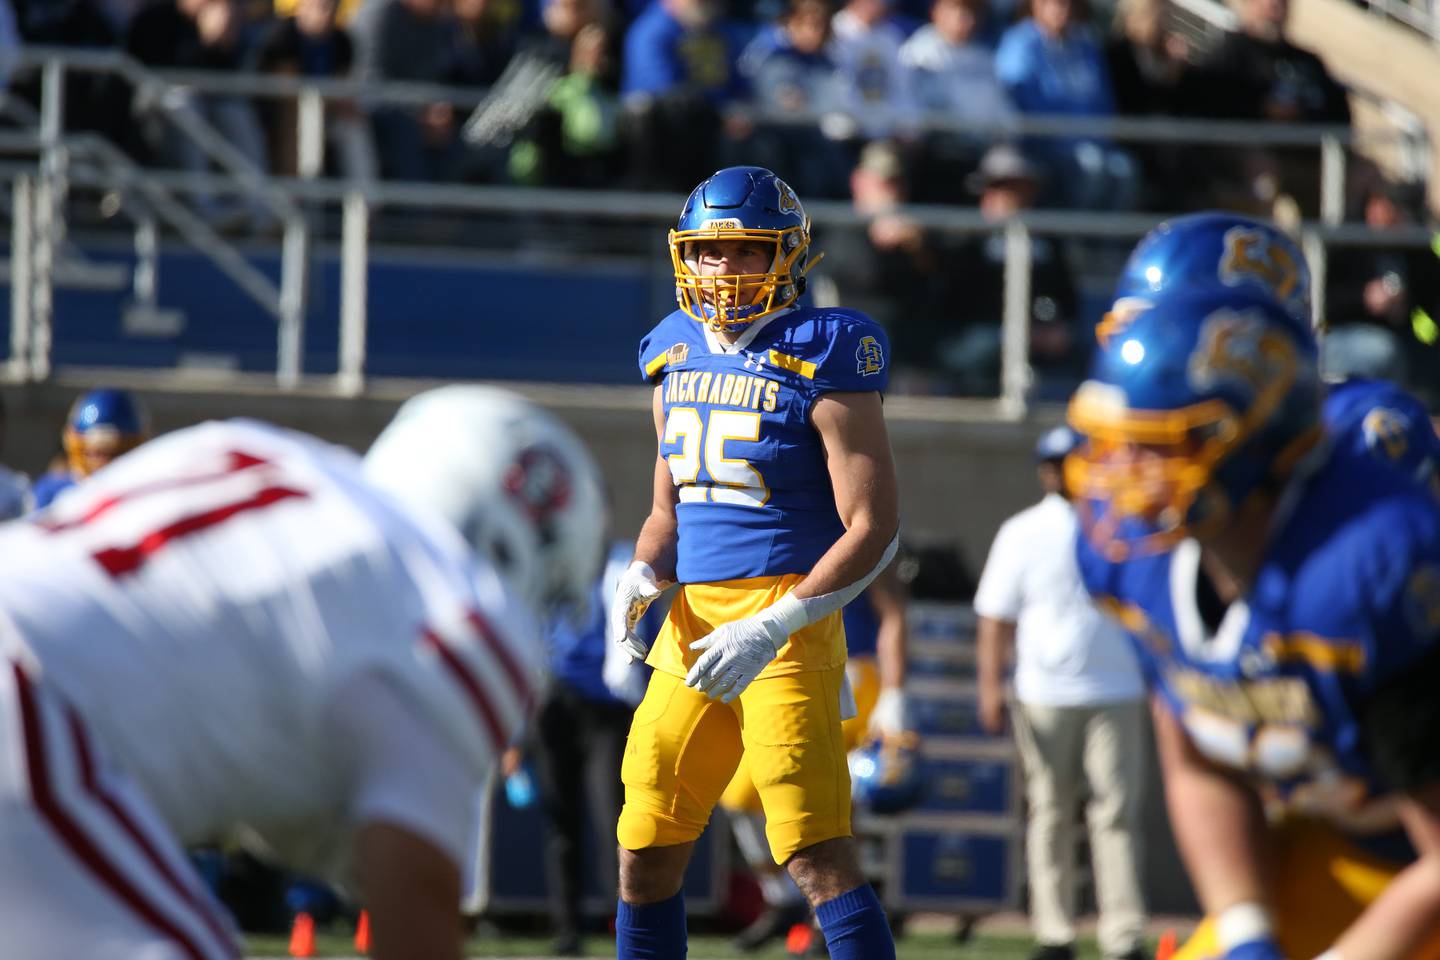 BROOKINGS, SD - OCTOBER 8: South Dakota Coyotes at South Dakota State Jackrabbits football in Brookings, SD on October 8, 2022. (Photo by Dave Eggen/Inertia)